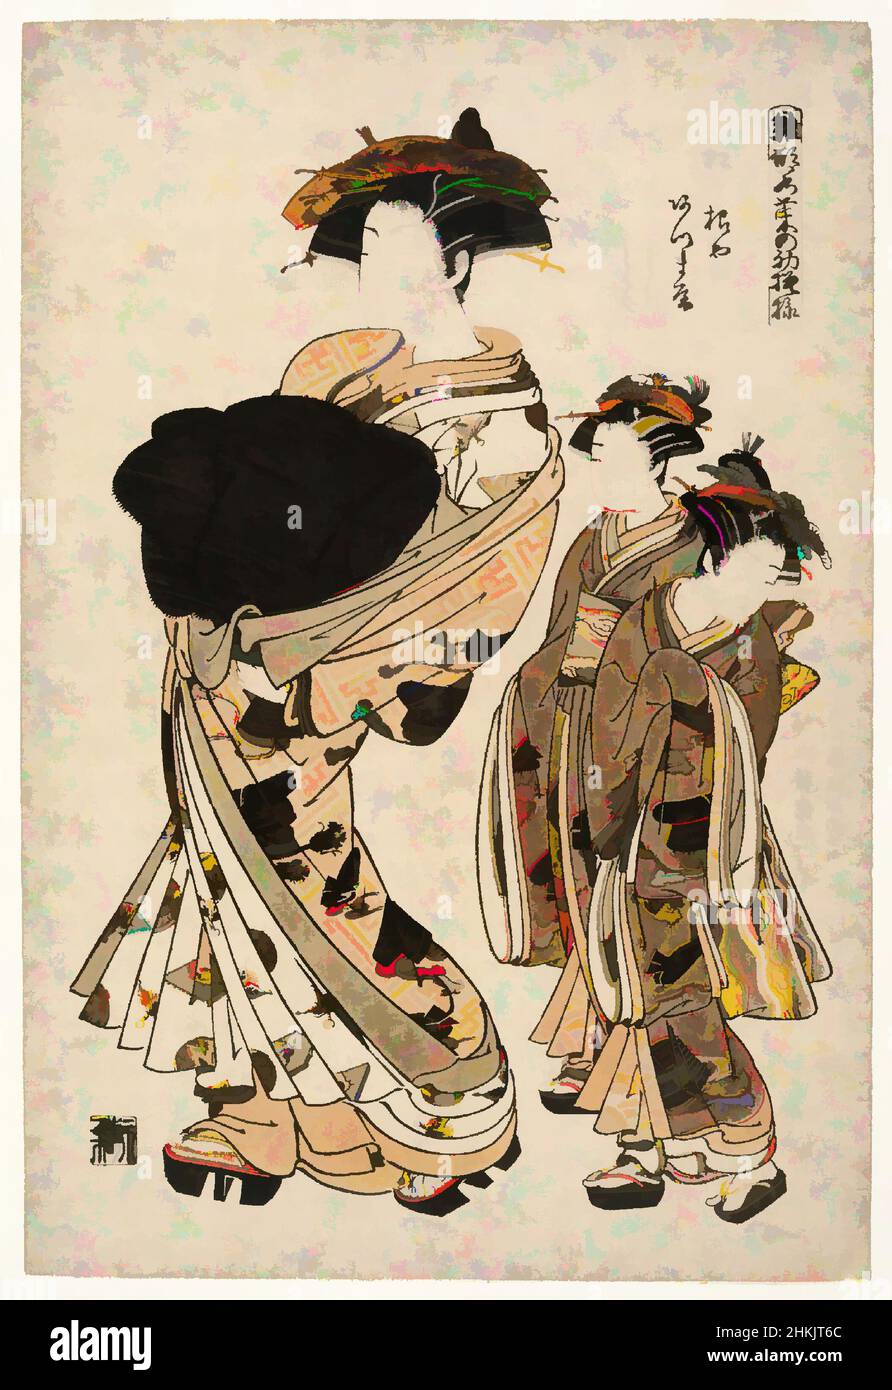 Art inspired by Azumaya, a Yoshiwara Beauty of the Tea House Matsu Hanaya Followed by Two Attendants, From the series: Hinagata Wakana no Hatsu moyo 'The First Dyed Designs for Spring Grasses.', Isoda Koryusai, Japanese, ca. 1766-1788, Color woodblock print on paper, Japan, ca. 1777, Classic works modernized by Artotop with a splash of modernity. Shapes, color and value, eye-catching visual impact on art. Emotions through freedom of artworks in a contemporary way. A timeless message pursuing a wildly creative new direction. Artists turning to the digital medium and creating the Artotop NFT Stock Photo